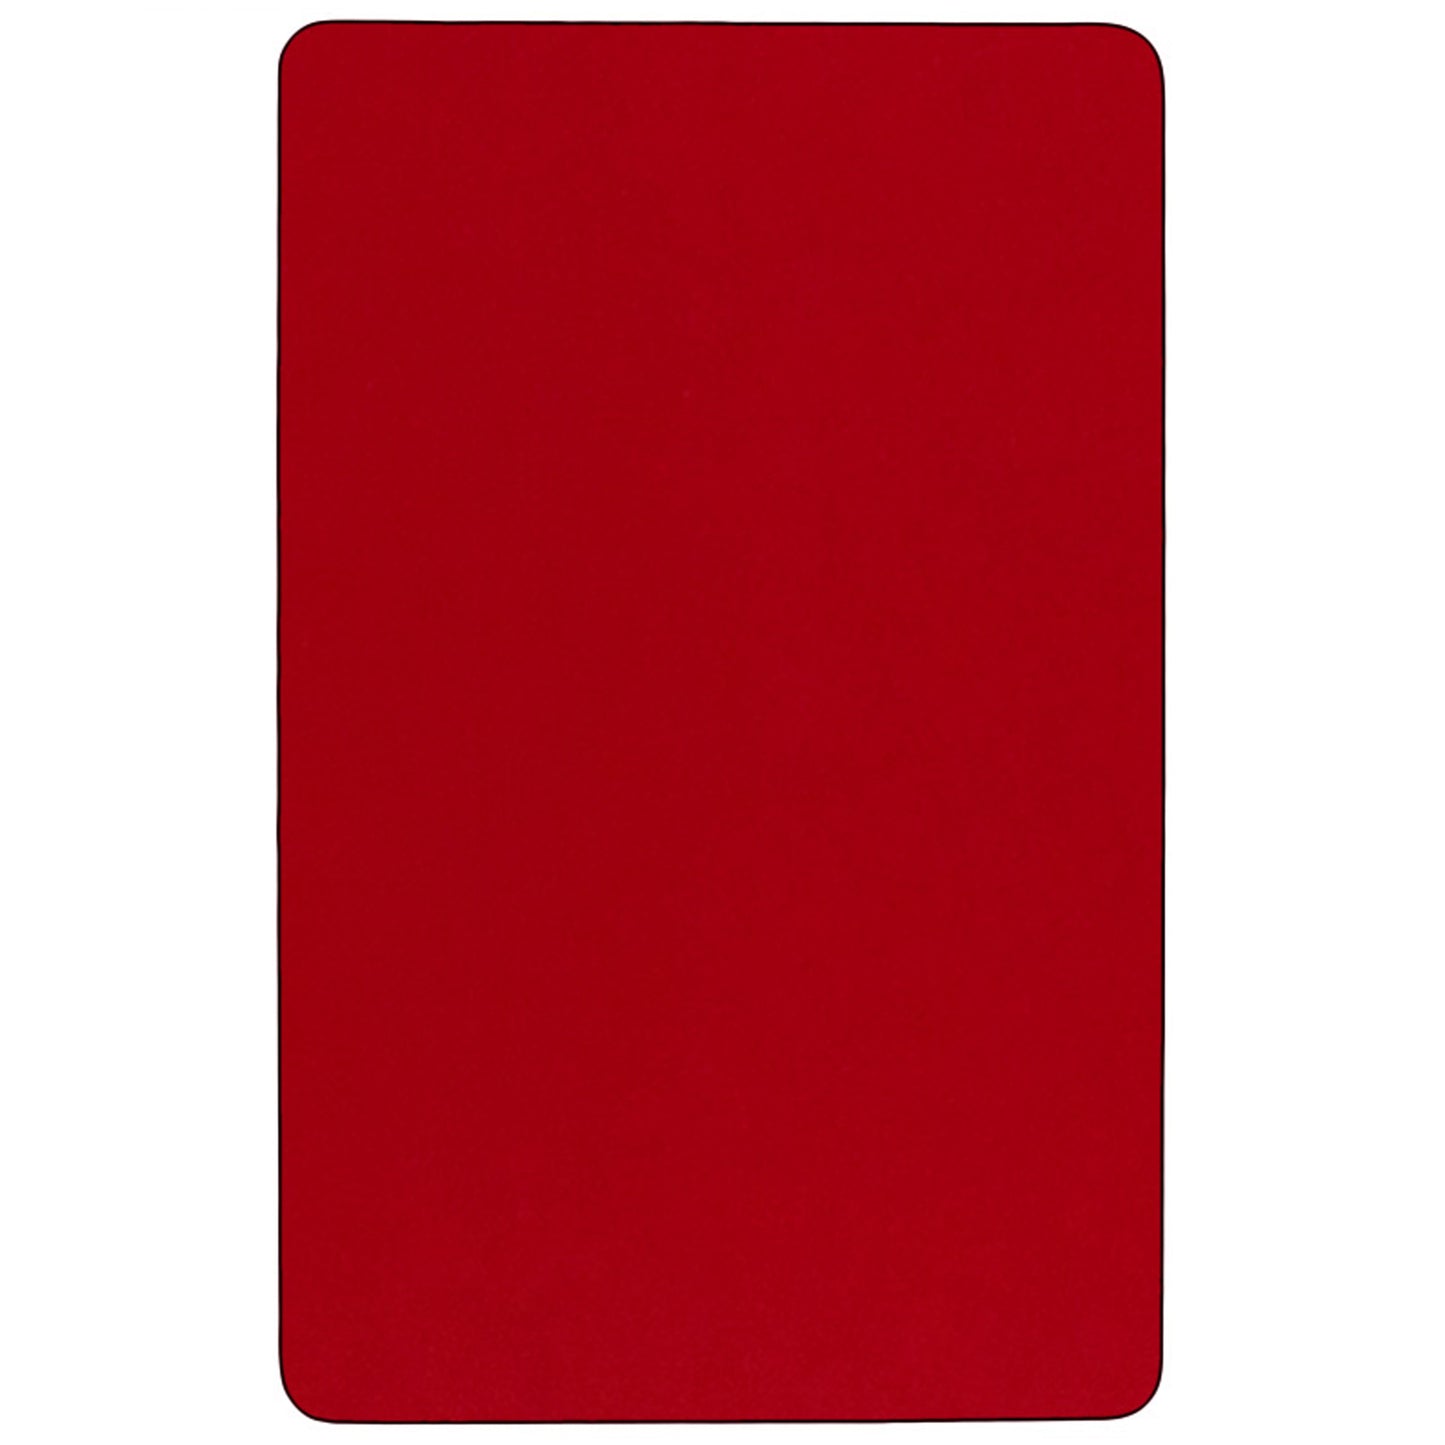 36x72 REC Red Activity Table XU-A3672-REC-RED-T-A-GG